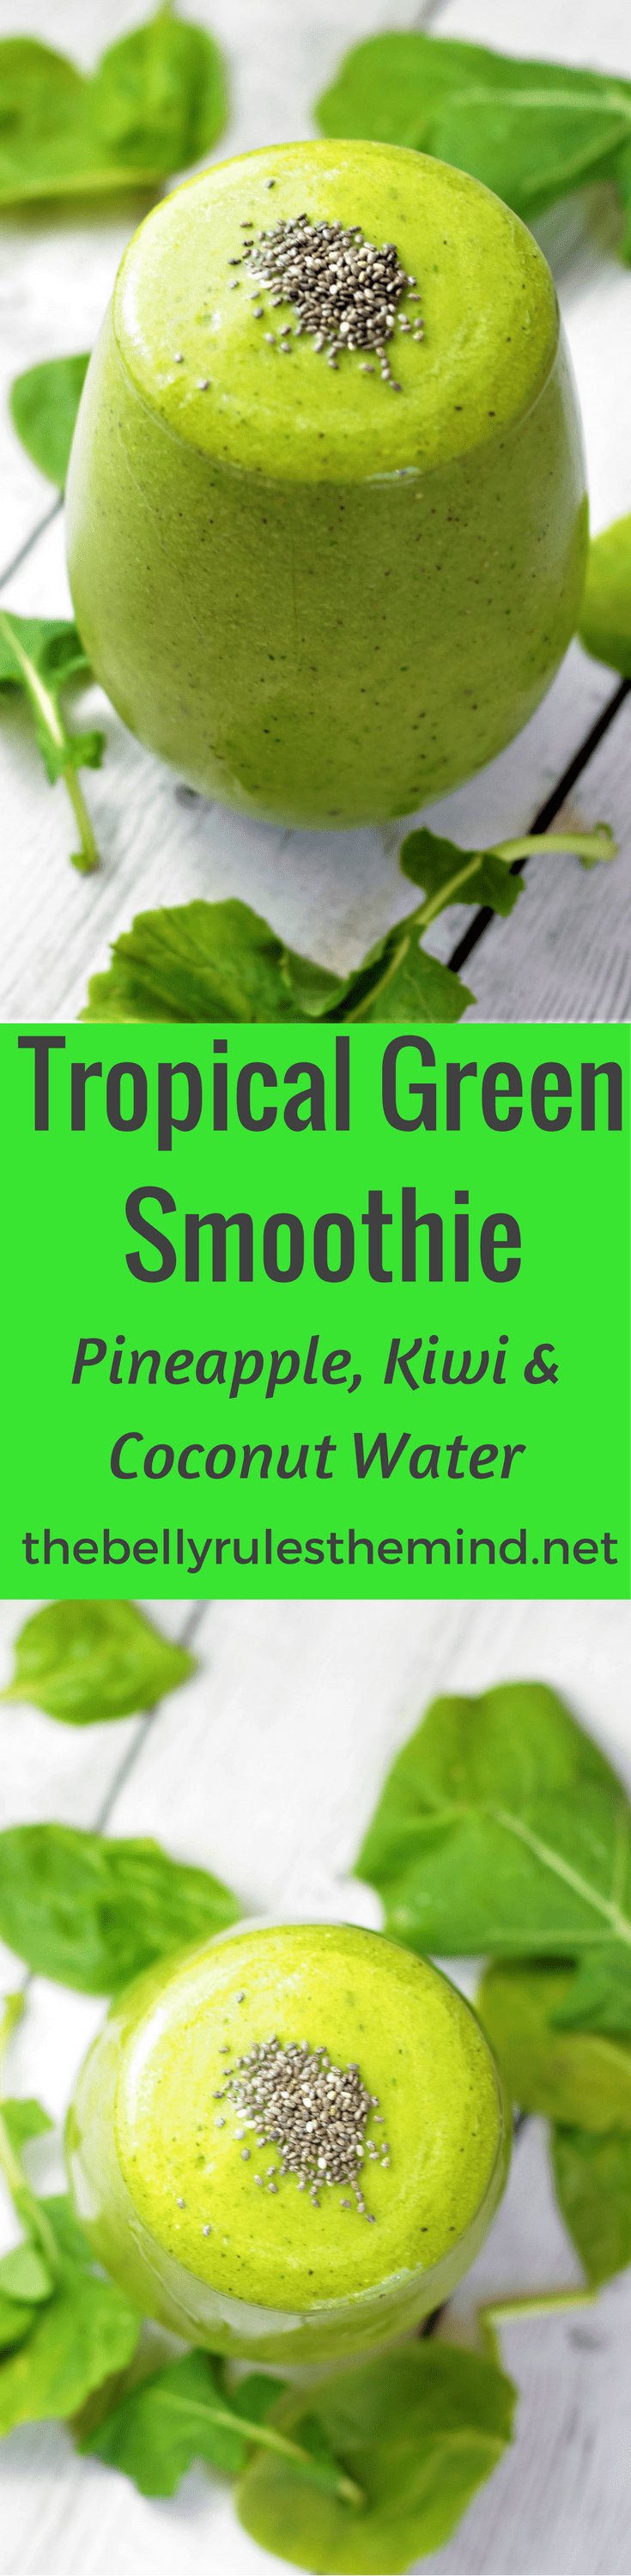 This Tropical Green Smoothie is sure to tantalize your taste buds. Nourish your body with the goodness of greens & tropical flavors like pineapple, kiwi, banana, coconut water. Vegan + Gluten Free|www.thebellyrulesthemind.net @bellyrulesdmind